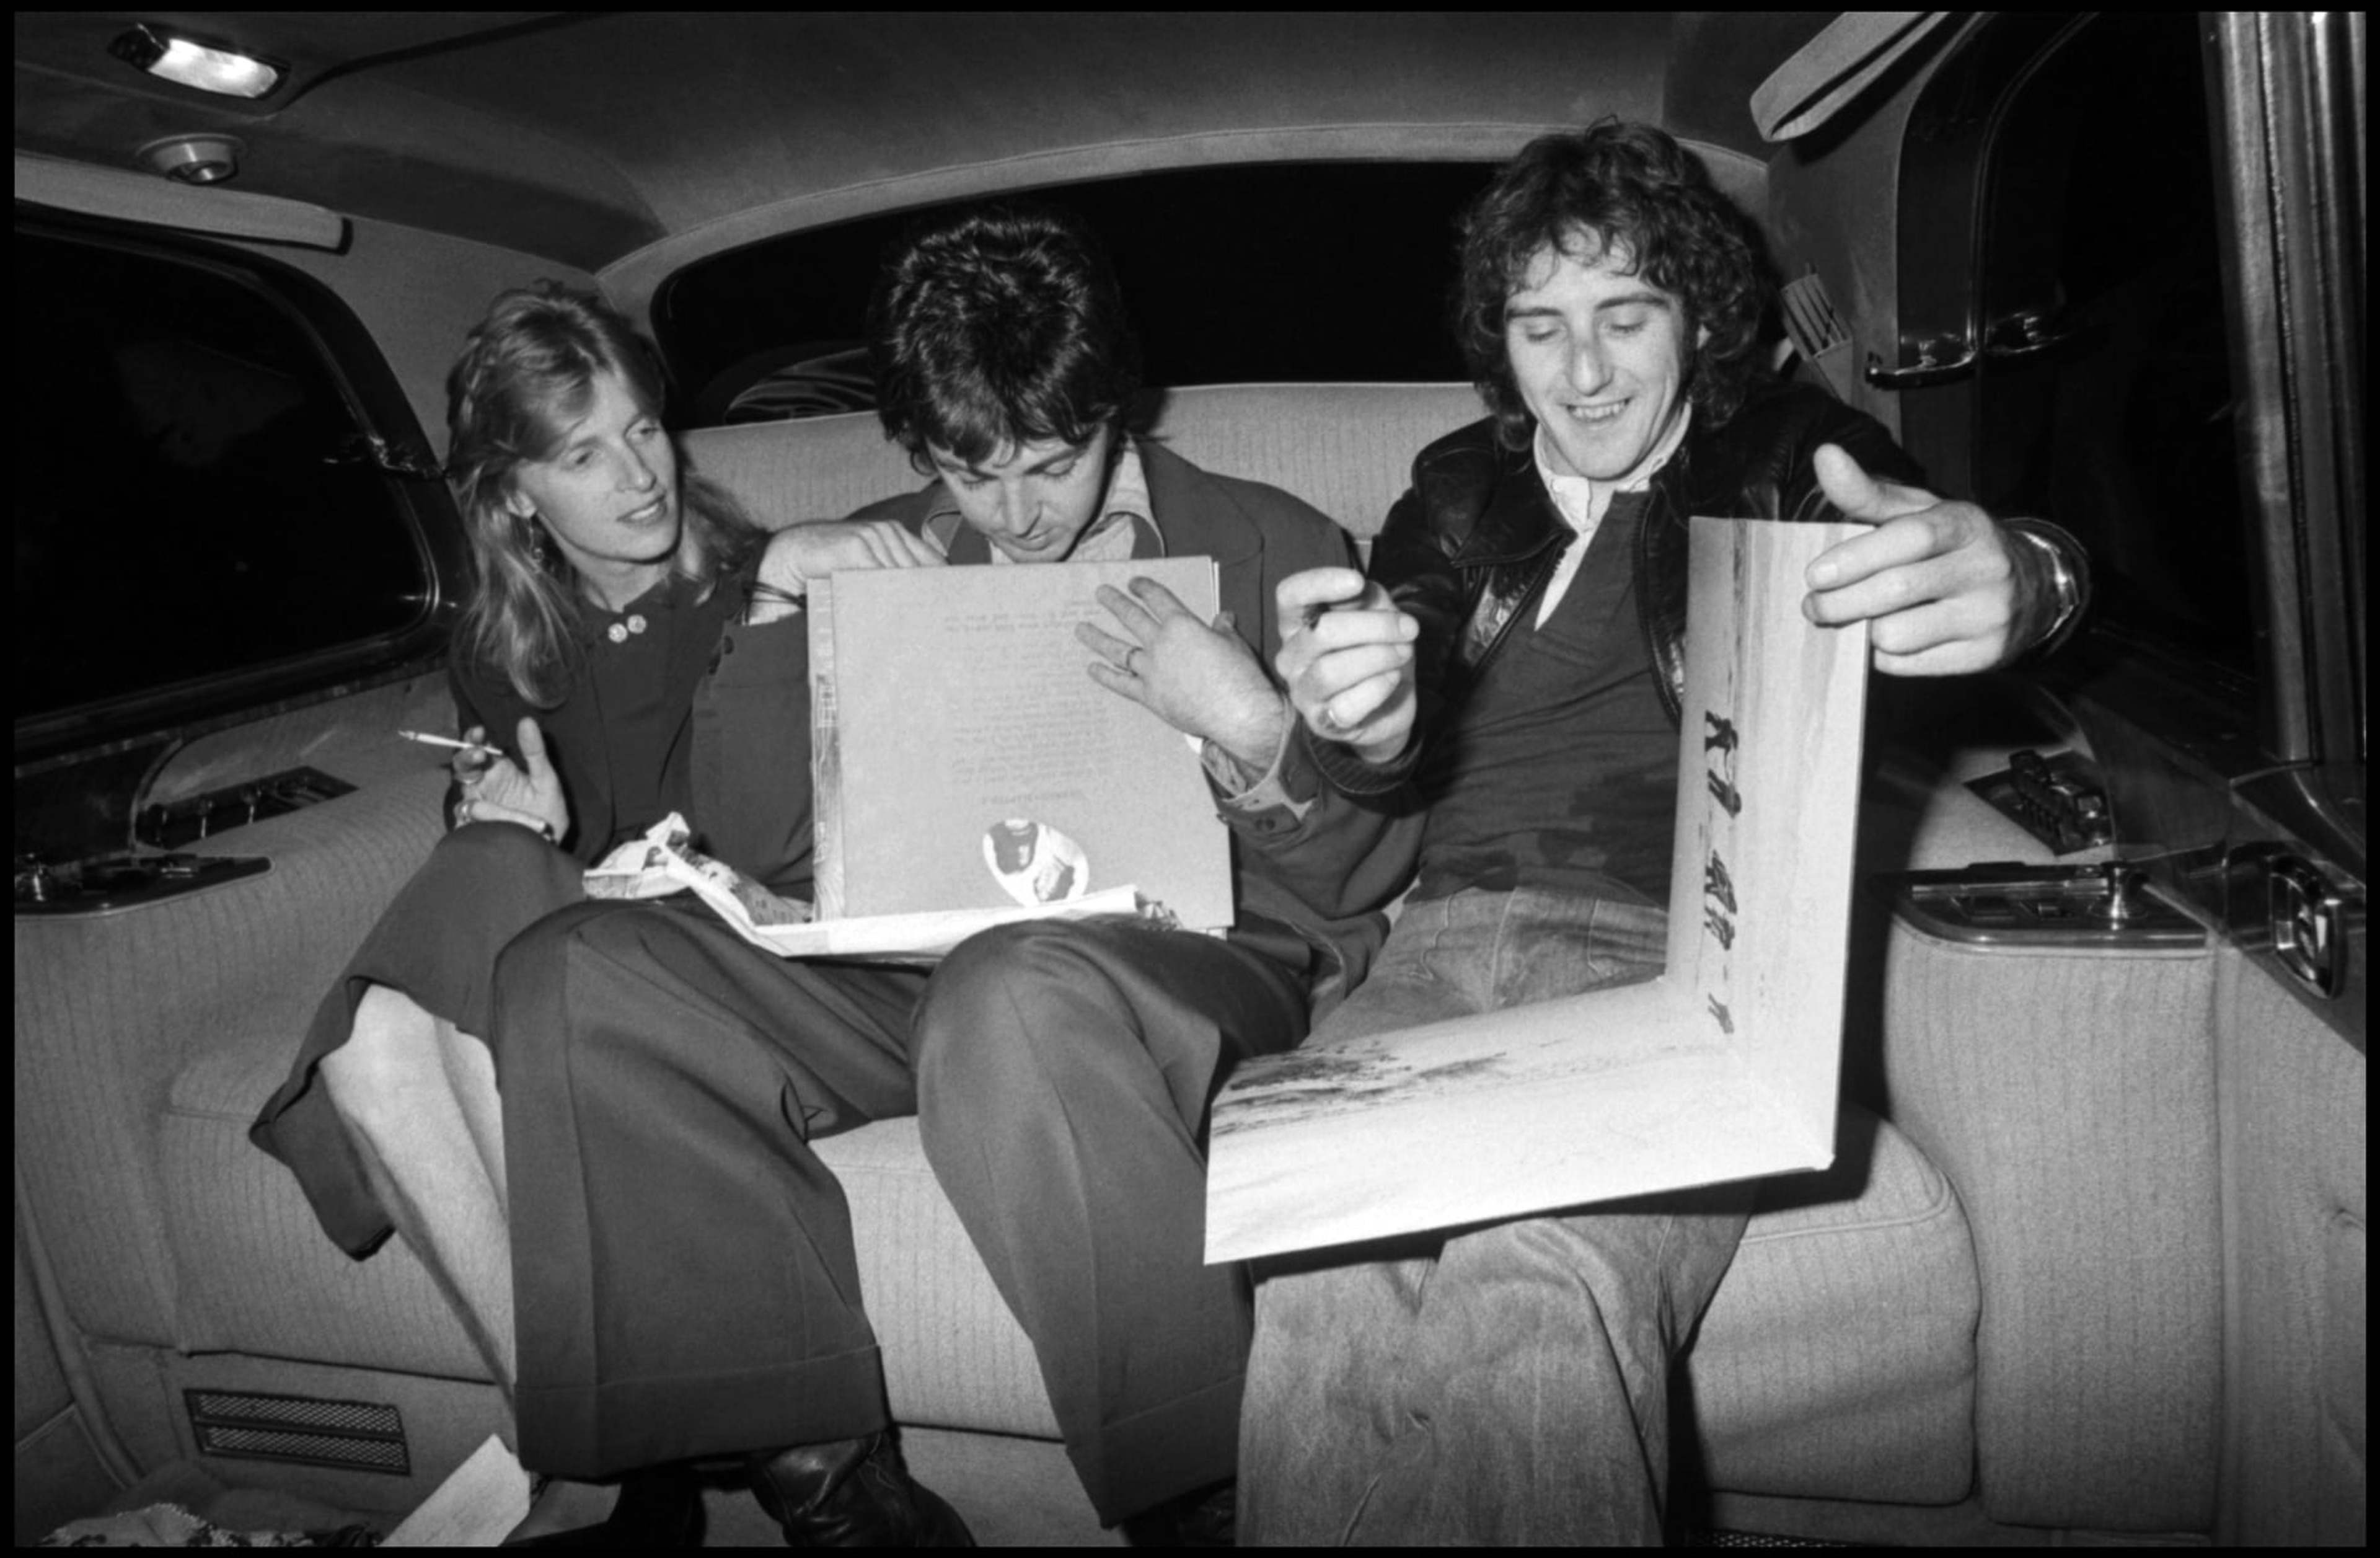 Linda, Paul, and Denny Laine holding books in the back of a car